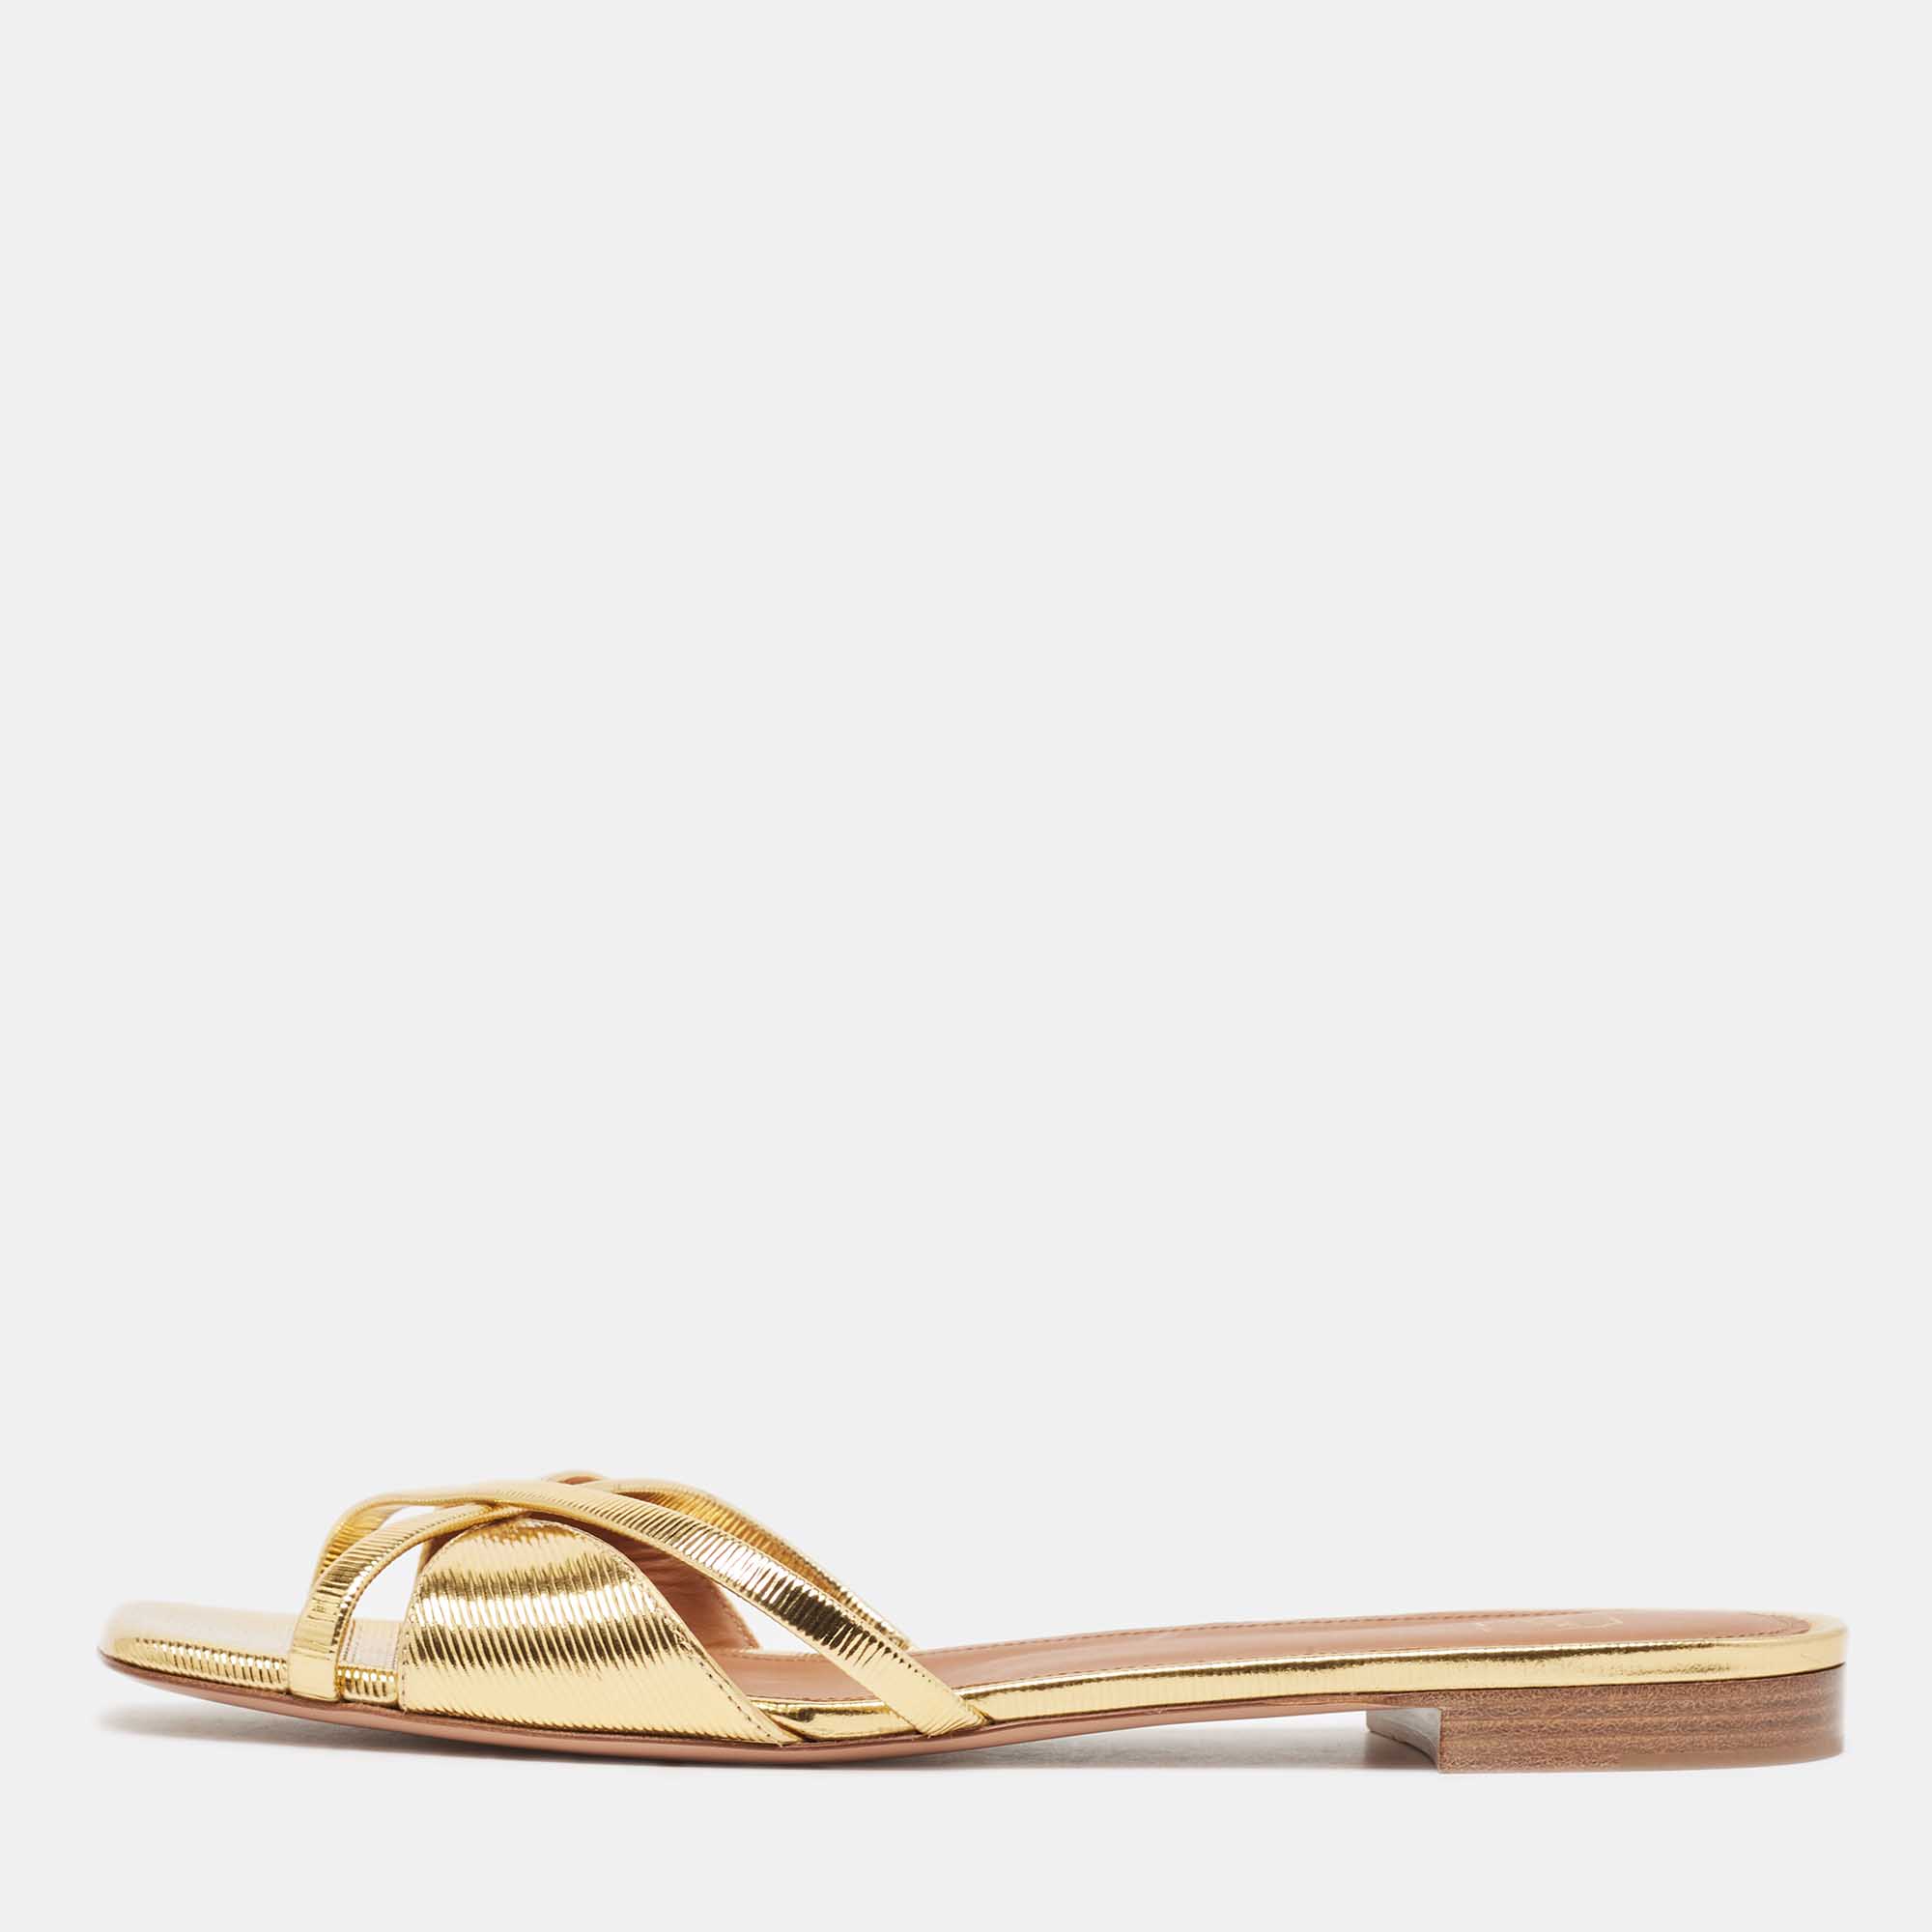 Malone souliers gold textured leather penn flat slides size 41